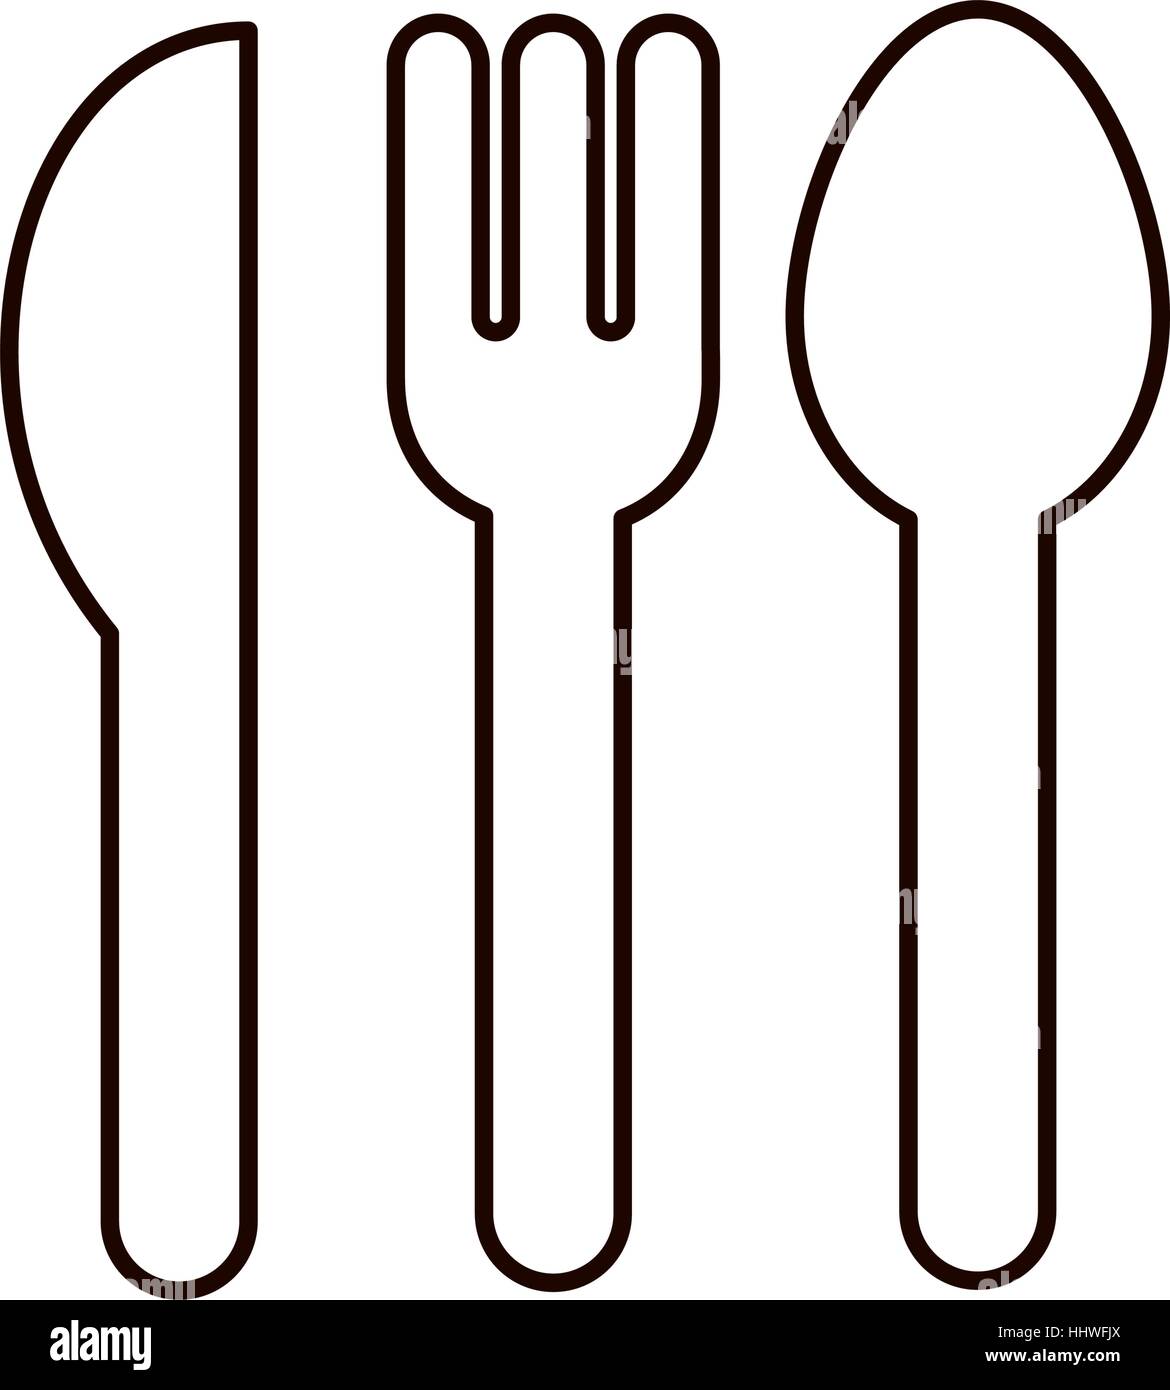 contour set collection cutlery icon flat vector illustration Stock Vector